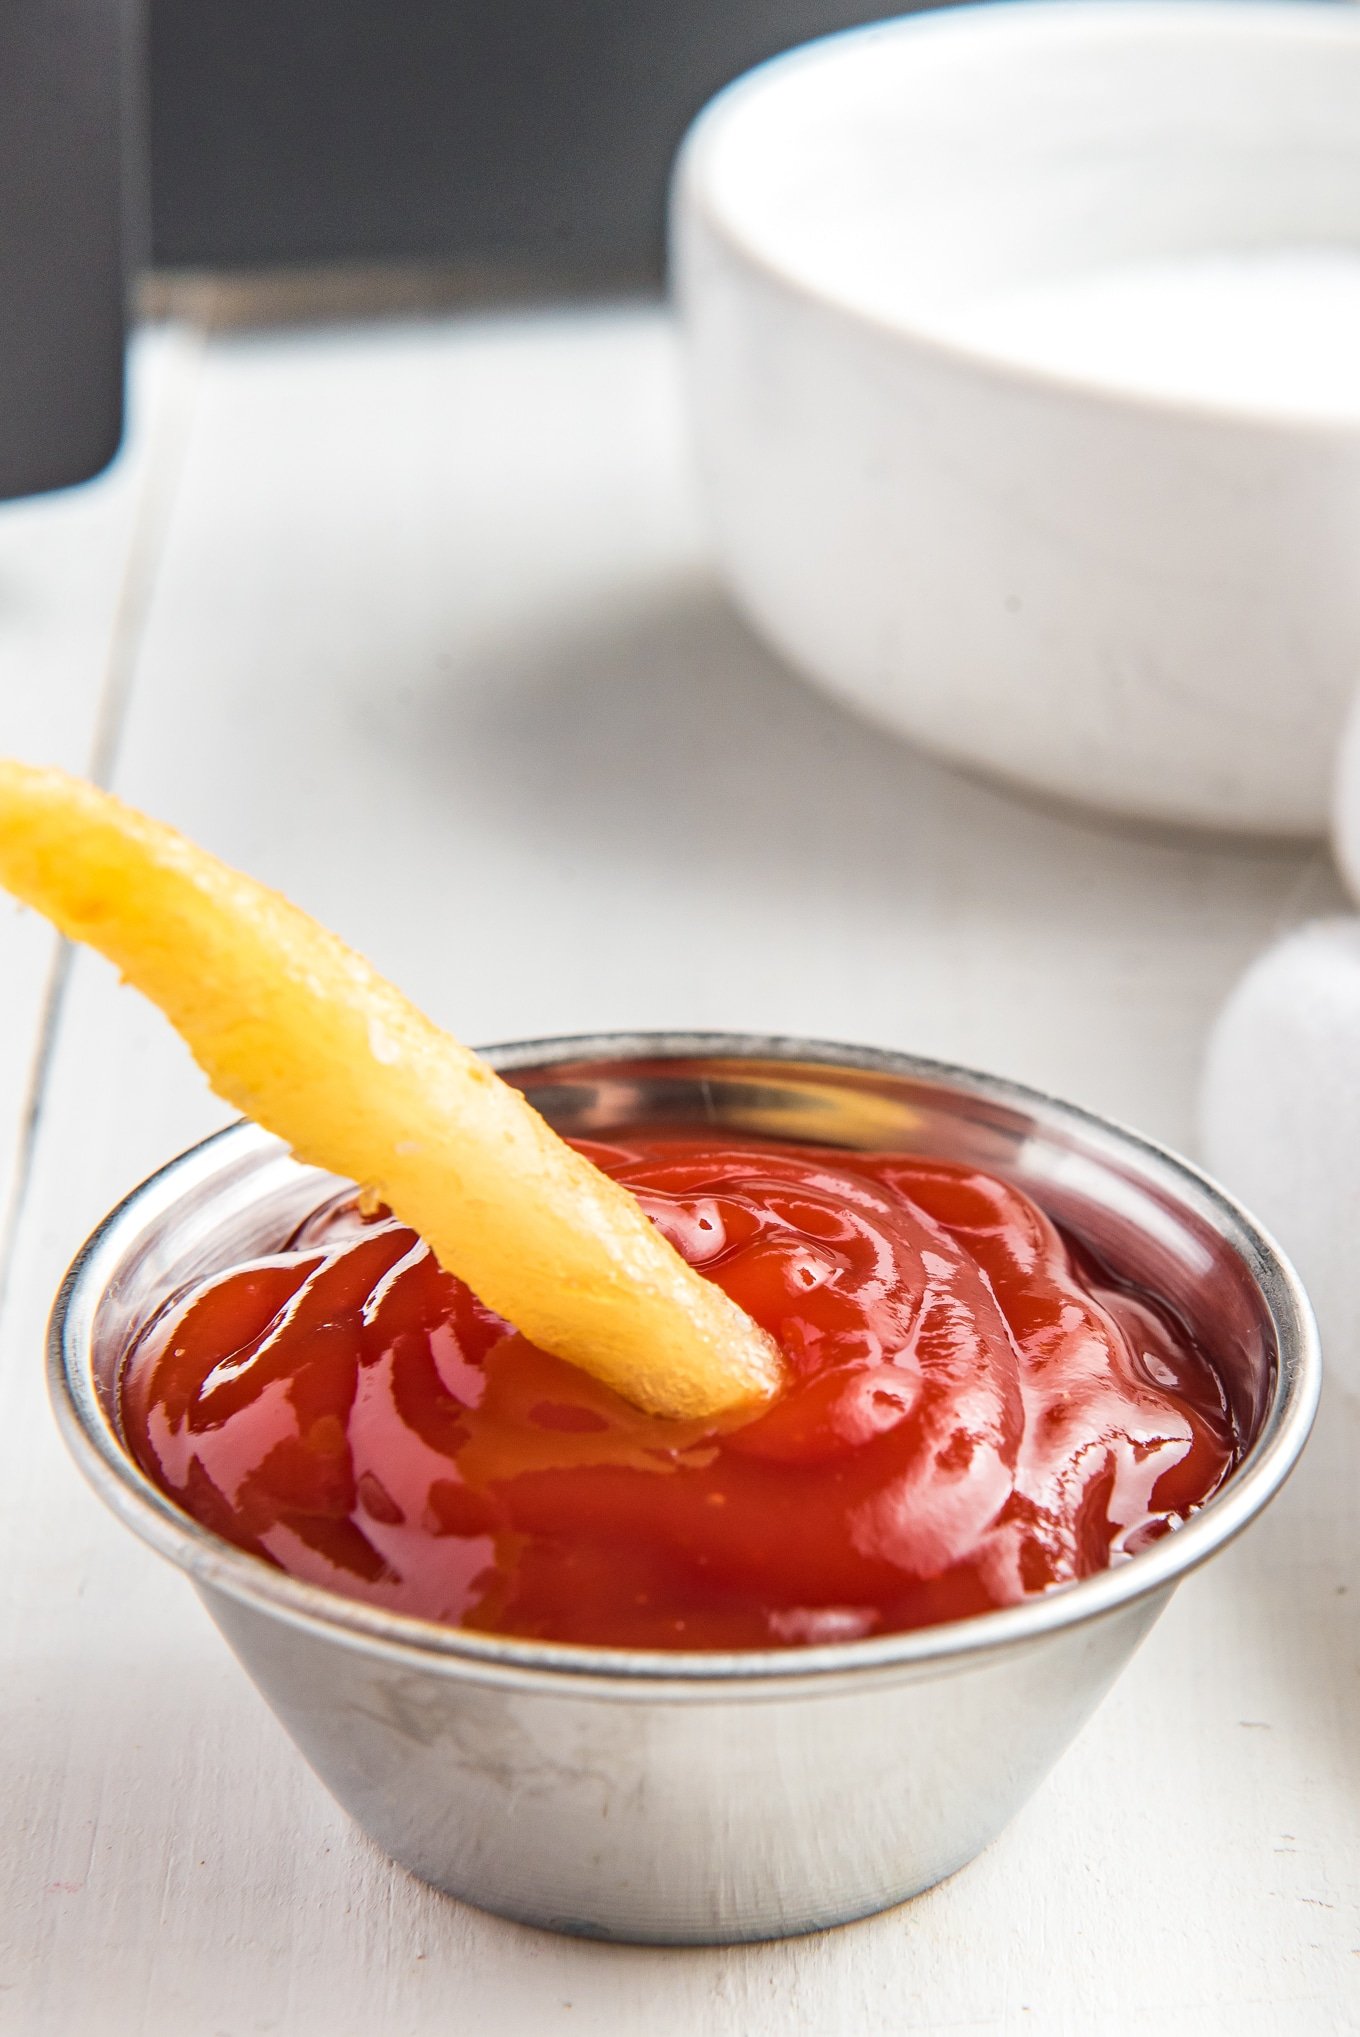 air fryer french fry dipped in ketchup./ Enjoy crispy and delicious frozen French fries in minutes with this easy air fryer recipe. Get that classic crispy texture and savory flavor you love, with the convenience of the air fryer.